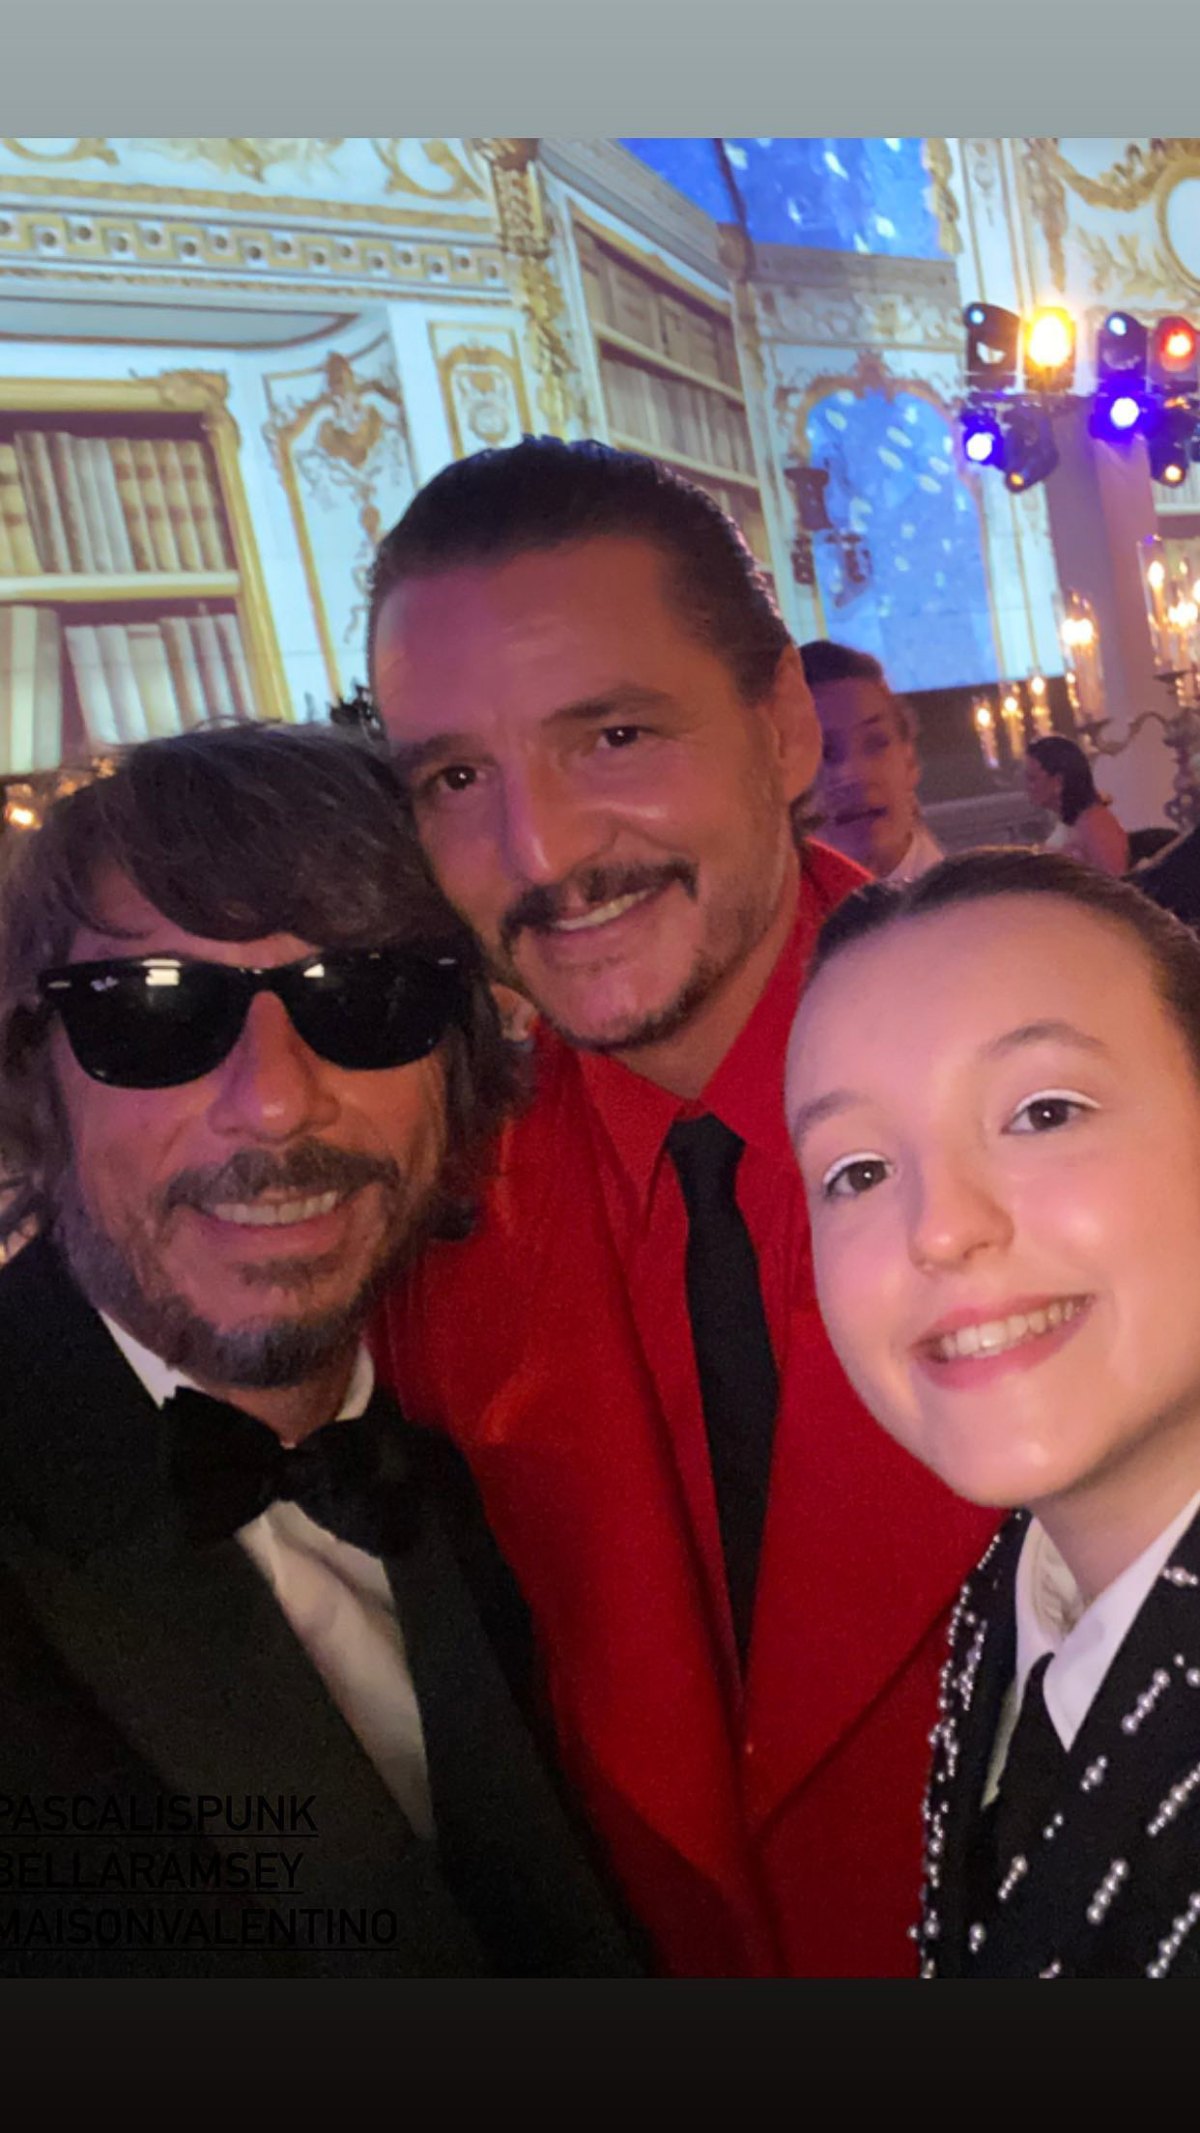 Pedro Pascal the Saint?! Met Gala reaches new heights with Saintly flair